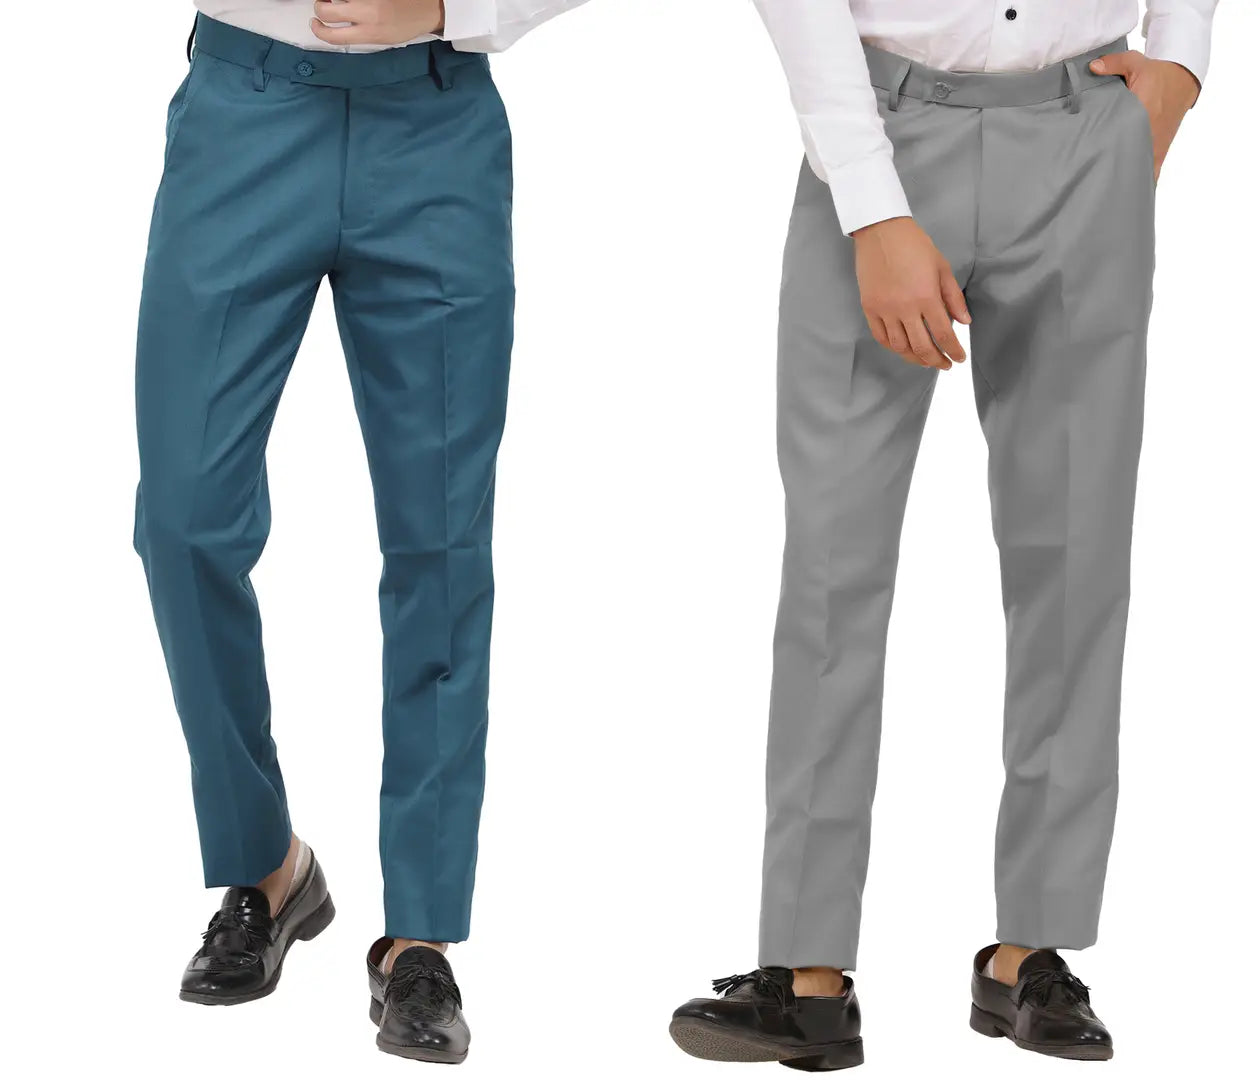 Kundan Men Poly-Viscose Blended Morpich Blue and Light Cot Grey Formal Trousers ( Pack of 2 Trousers )